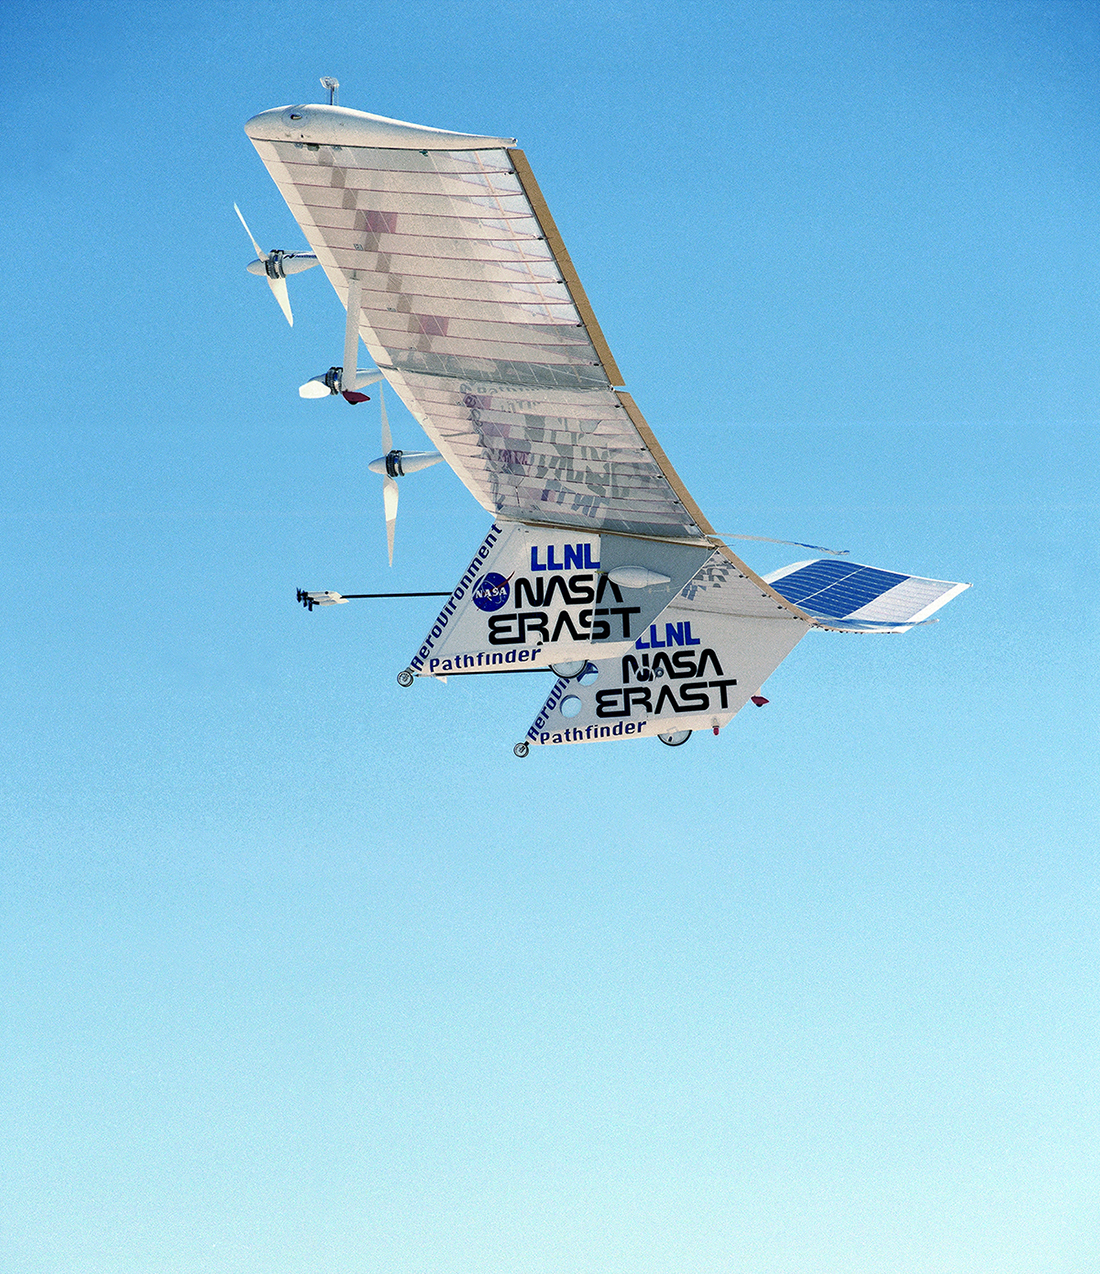 The Pathfinder solar-powered remotely piloted aircraft climbs to a record-setting altitude of 50,567 feet during a flight 